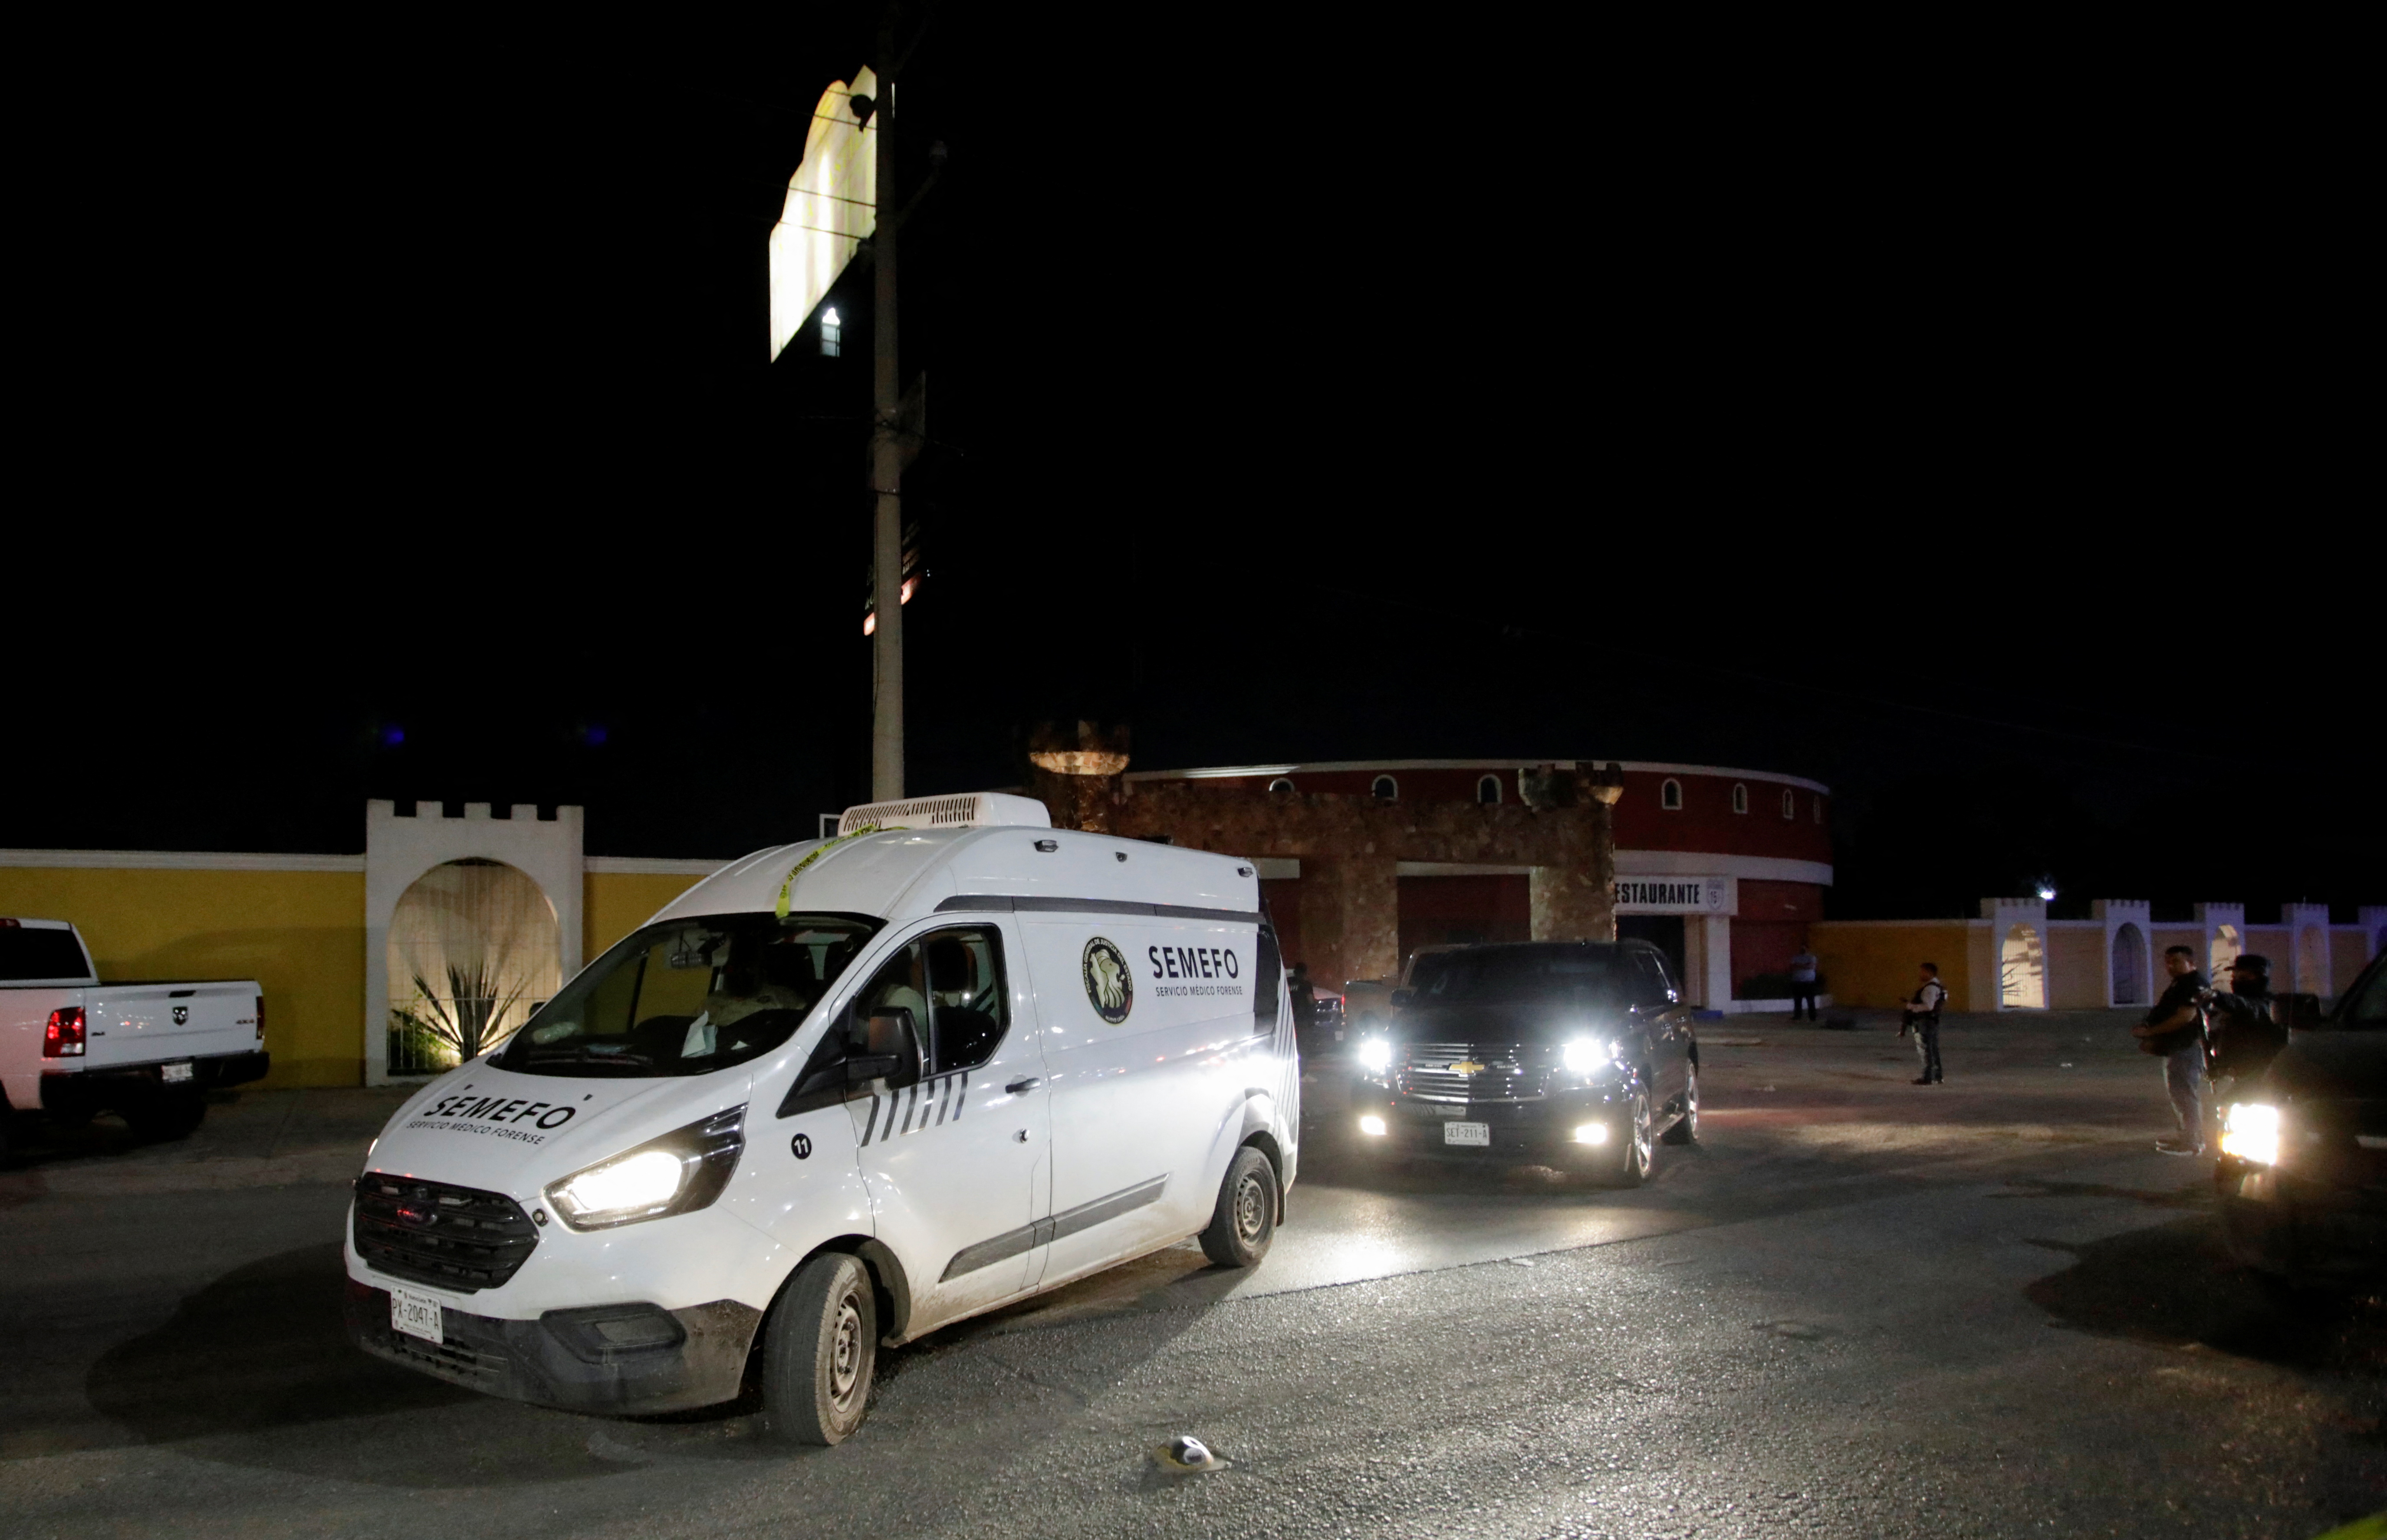 A forensic vehicle transporting the body of a woman found inside a water tank, leaves the Nueva Castilla Motel, near the place where Debanhi Escobar, an 18-year old student, has been missing since April 9, in Escobedo